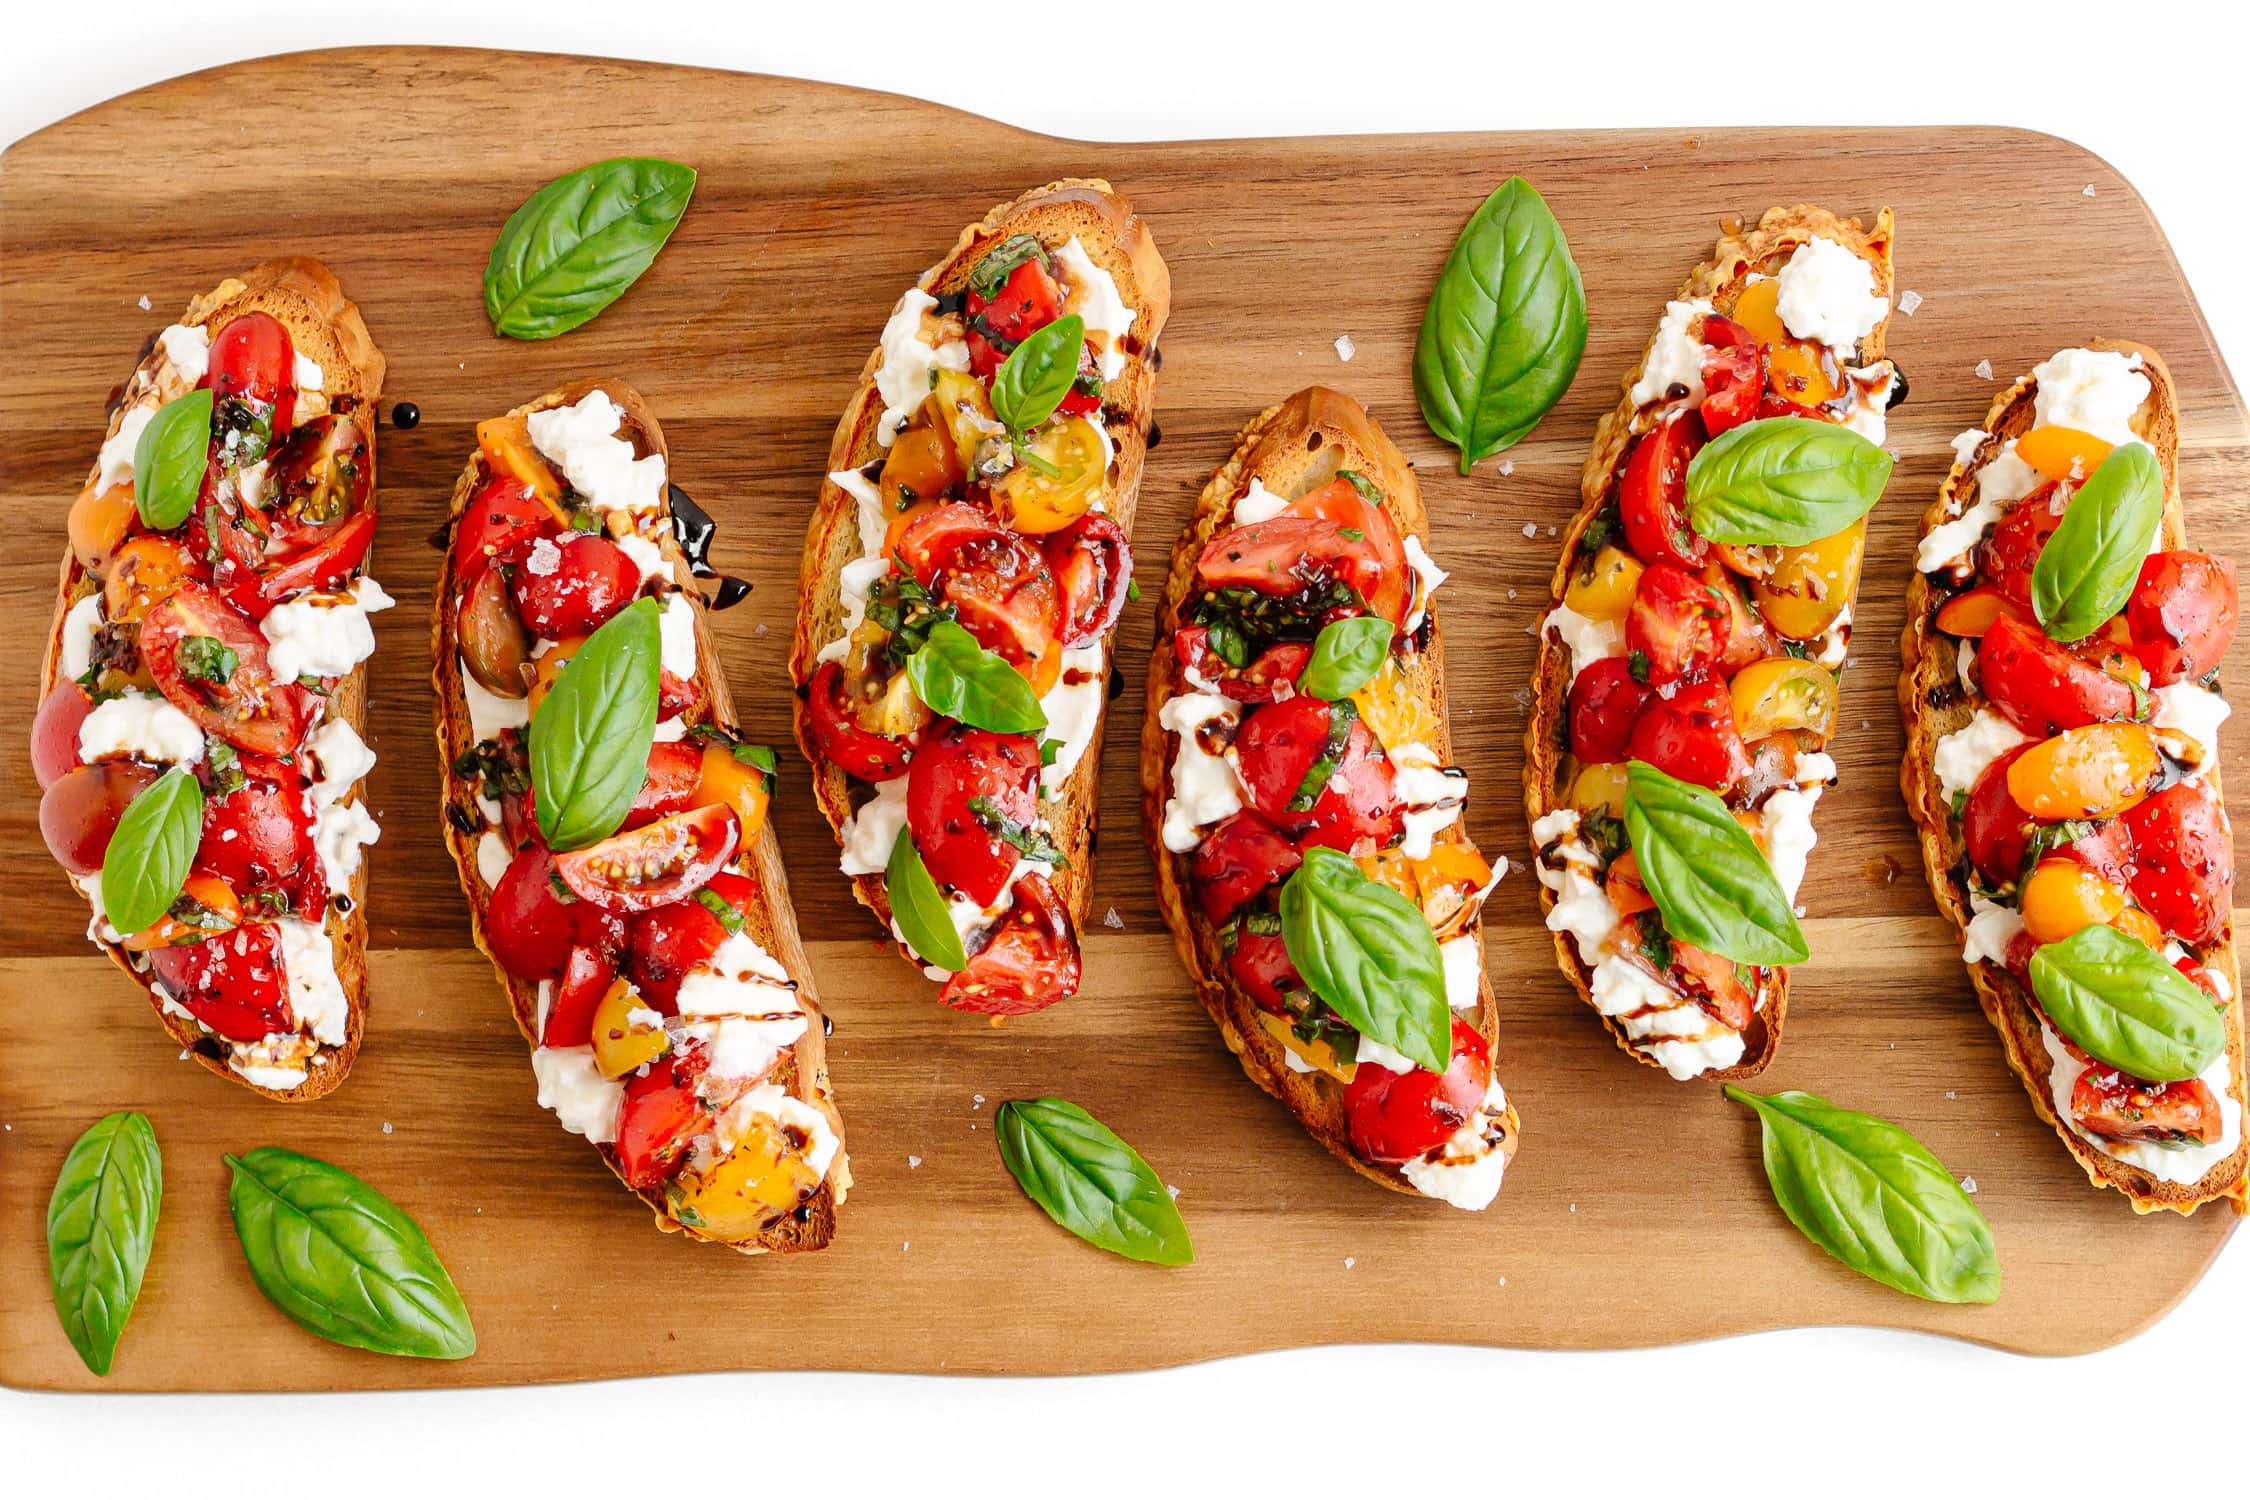 Burrata bruschetta with tomato and basil topping arranged on a wooden serving board.